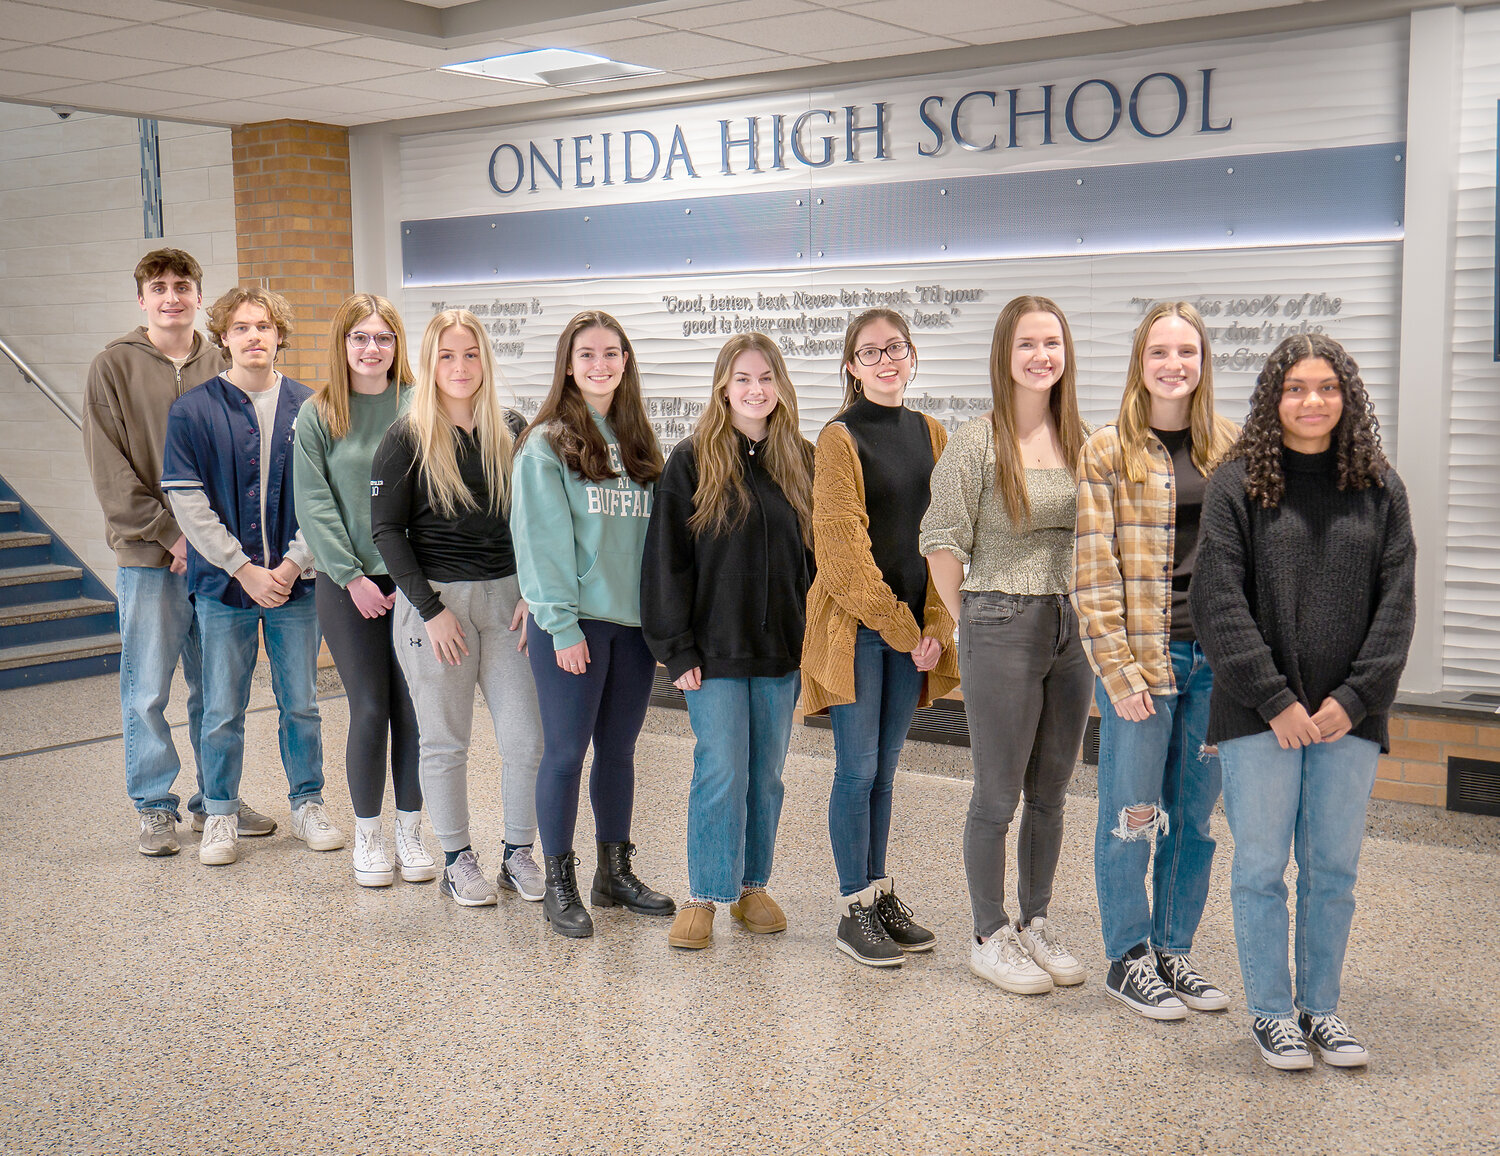 The  Top 10  students academically in Oneida High School’s Class of 2023 are, from left: Andrew Hicks, Robert Paul, Gabrielle Mazzullo, Kerrigan Crysler, Julia Bognaski, Olivia Piersall, Madison Ray, Olivia Hoffman, Jordan French and Syrriah Alexander. French is valedictorian, and Ray is salutatorian.